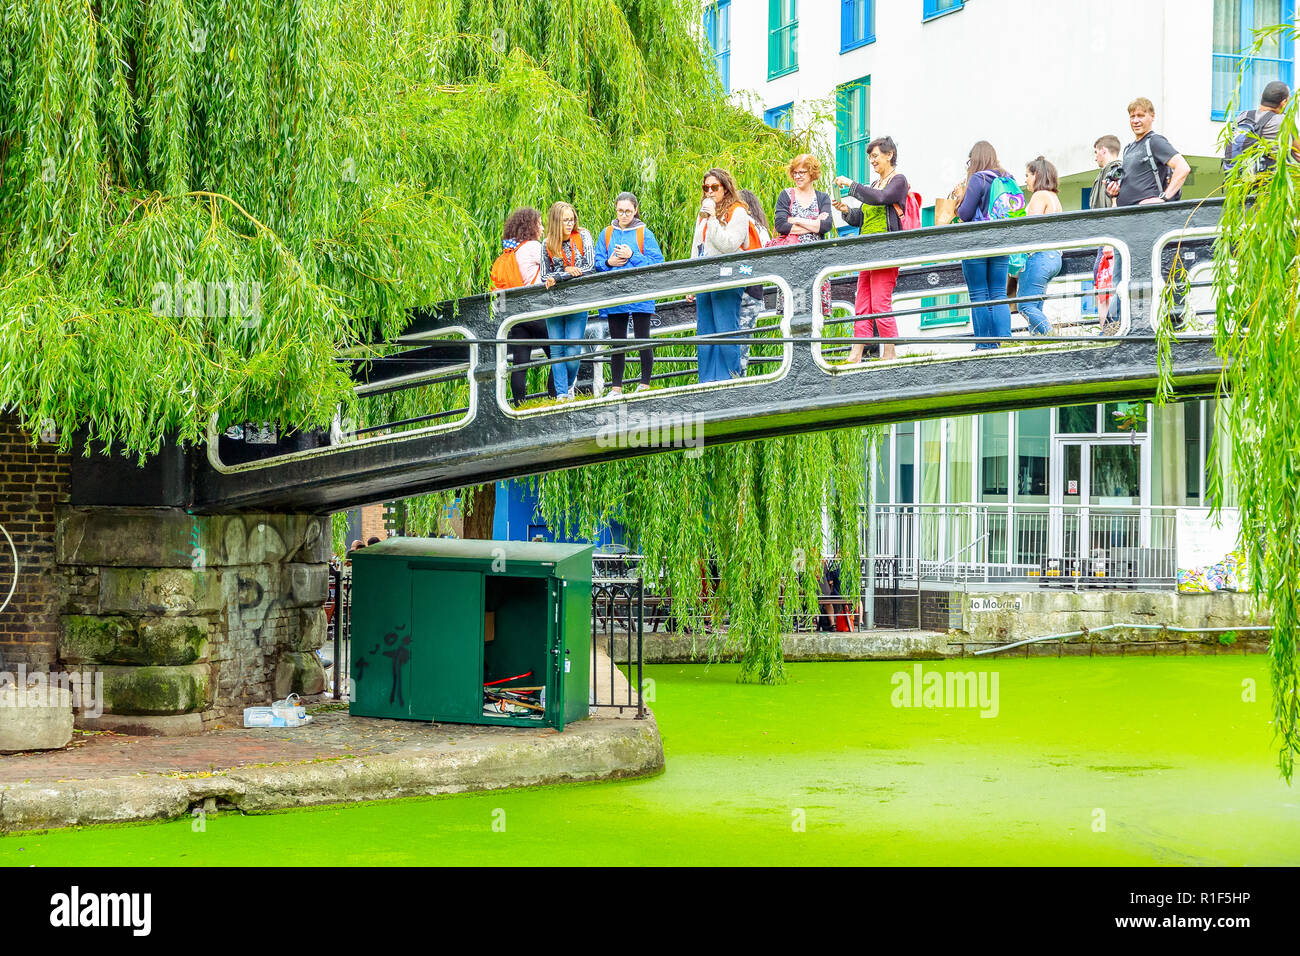 London, UK - September 1, 2018 - Tourists crossing the Camden Lock footbridge above Regents Canal covered by green duckweed Stock Photo